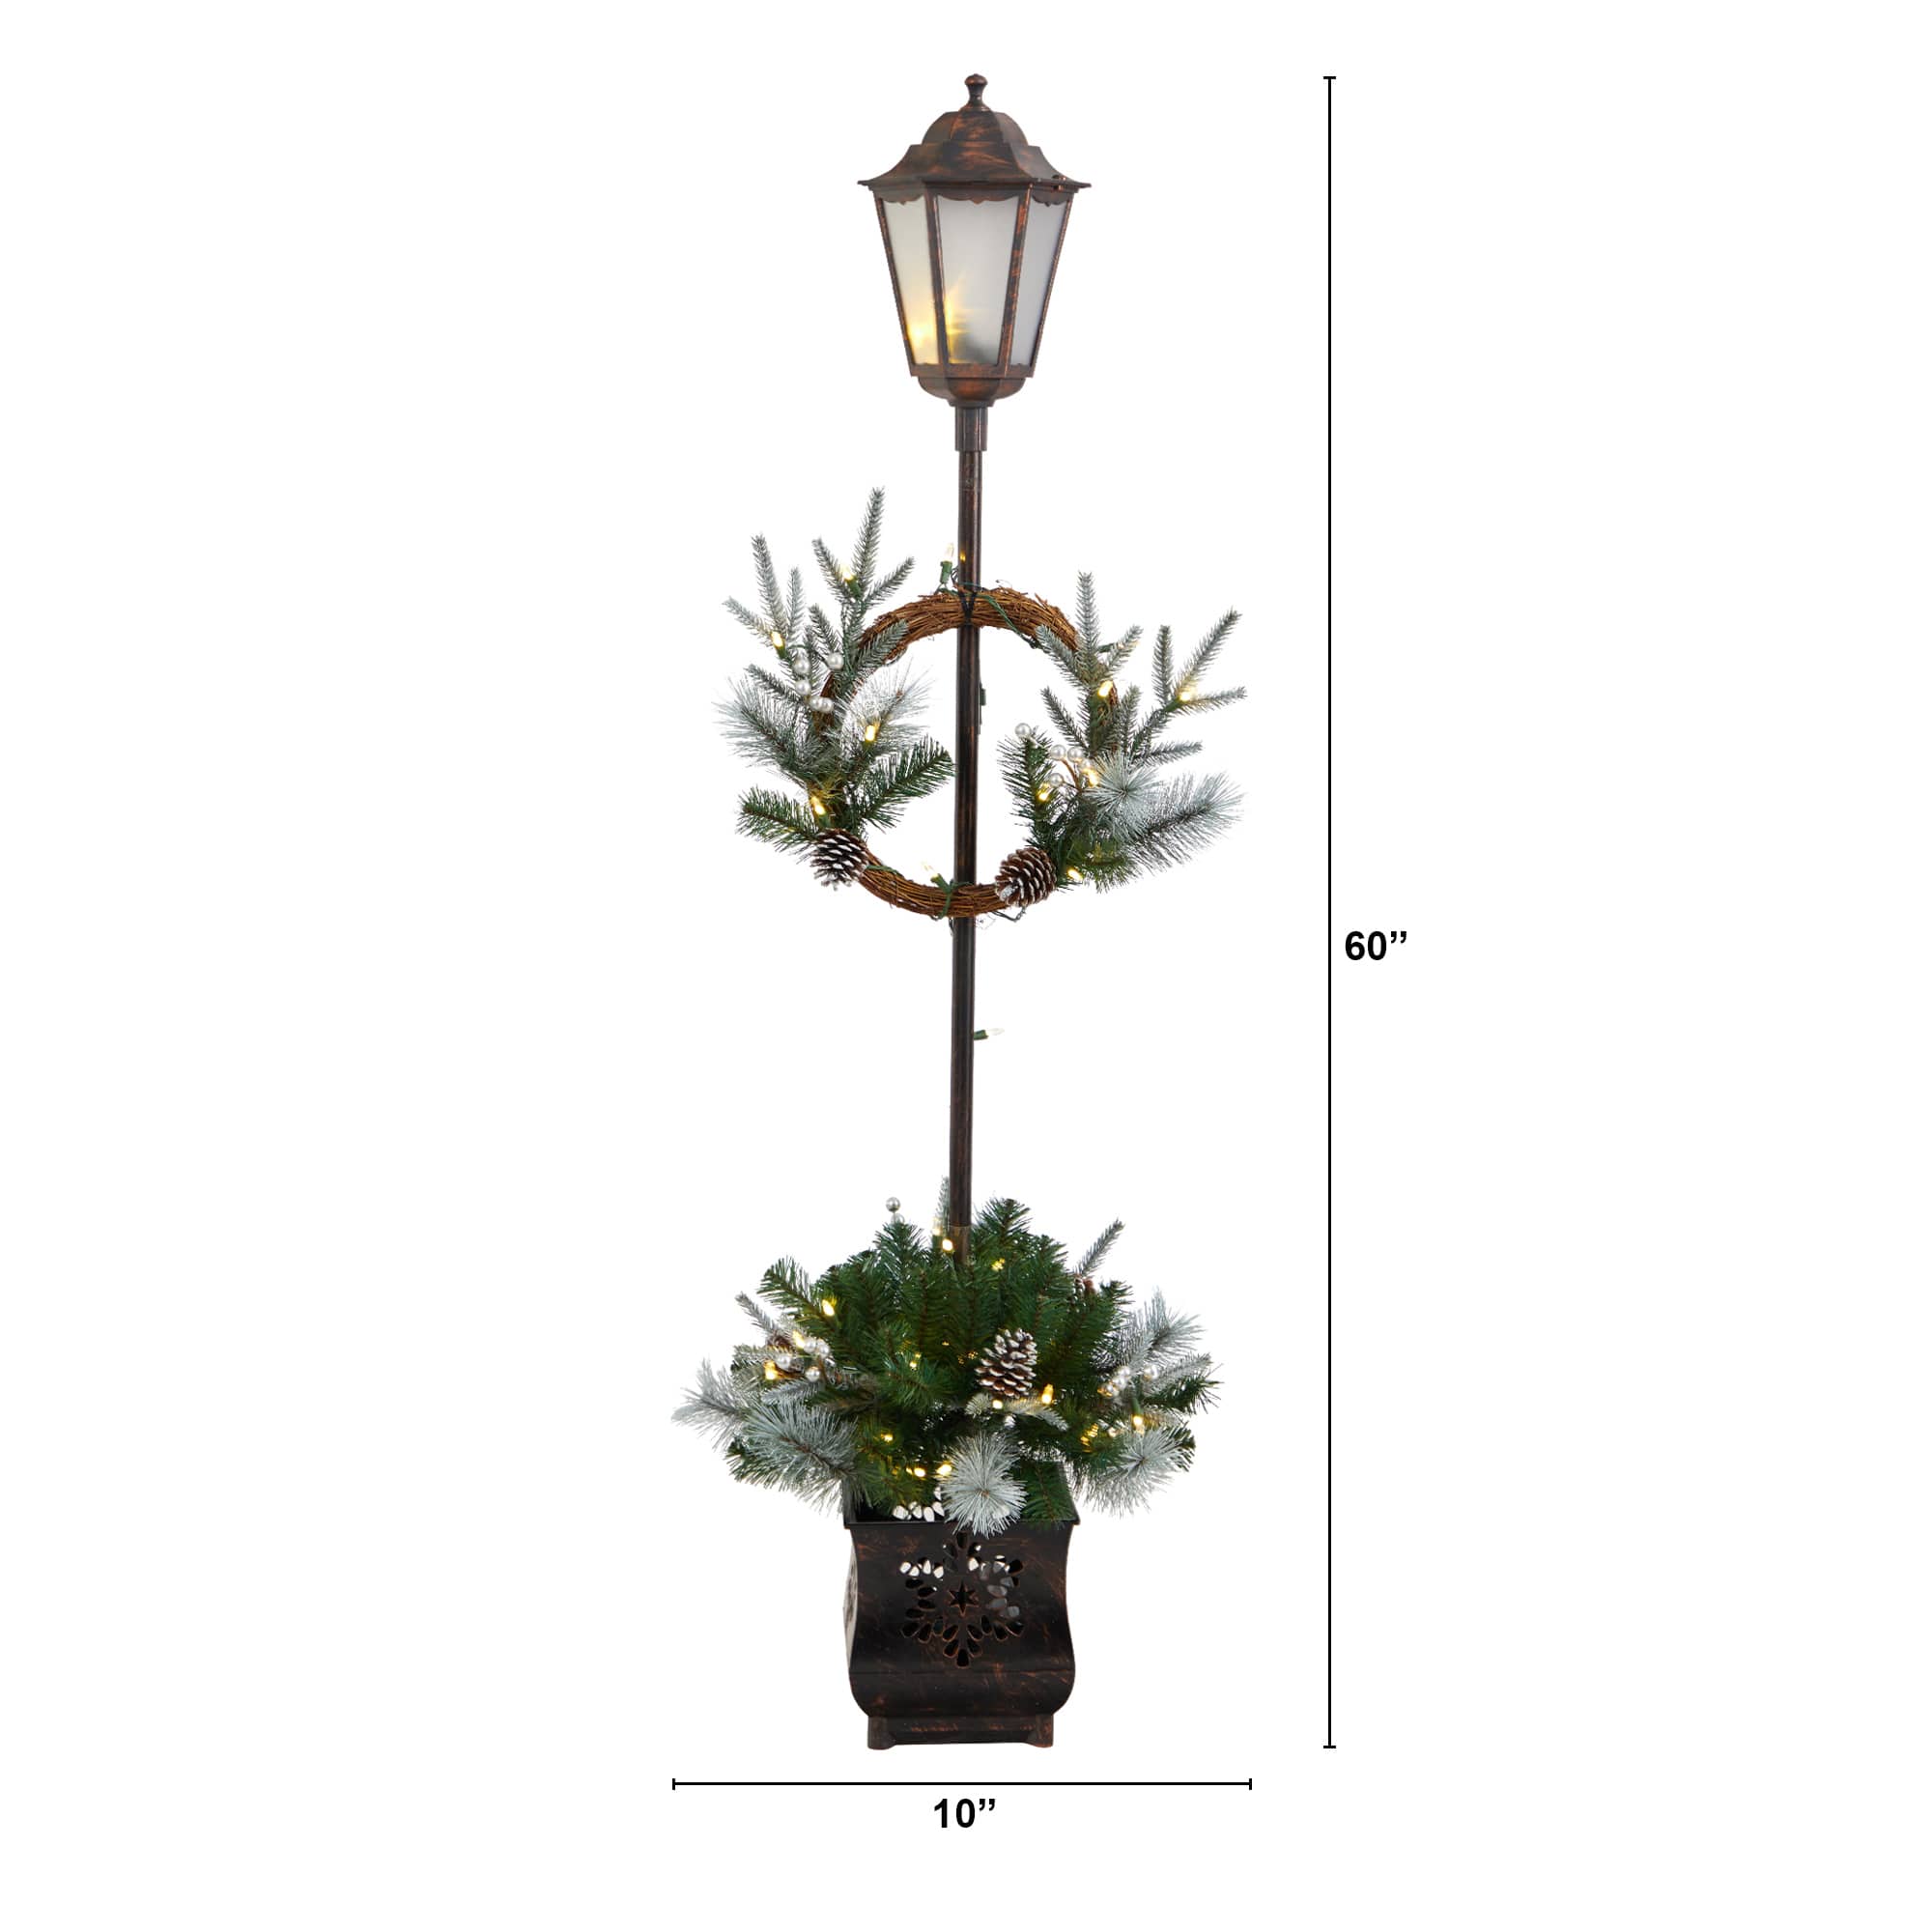 5ft. Pre-lit LED Holiday Decorated Lamp Post With Greenery In Decorative Planter